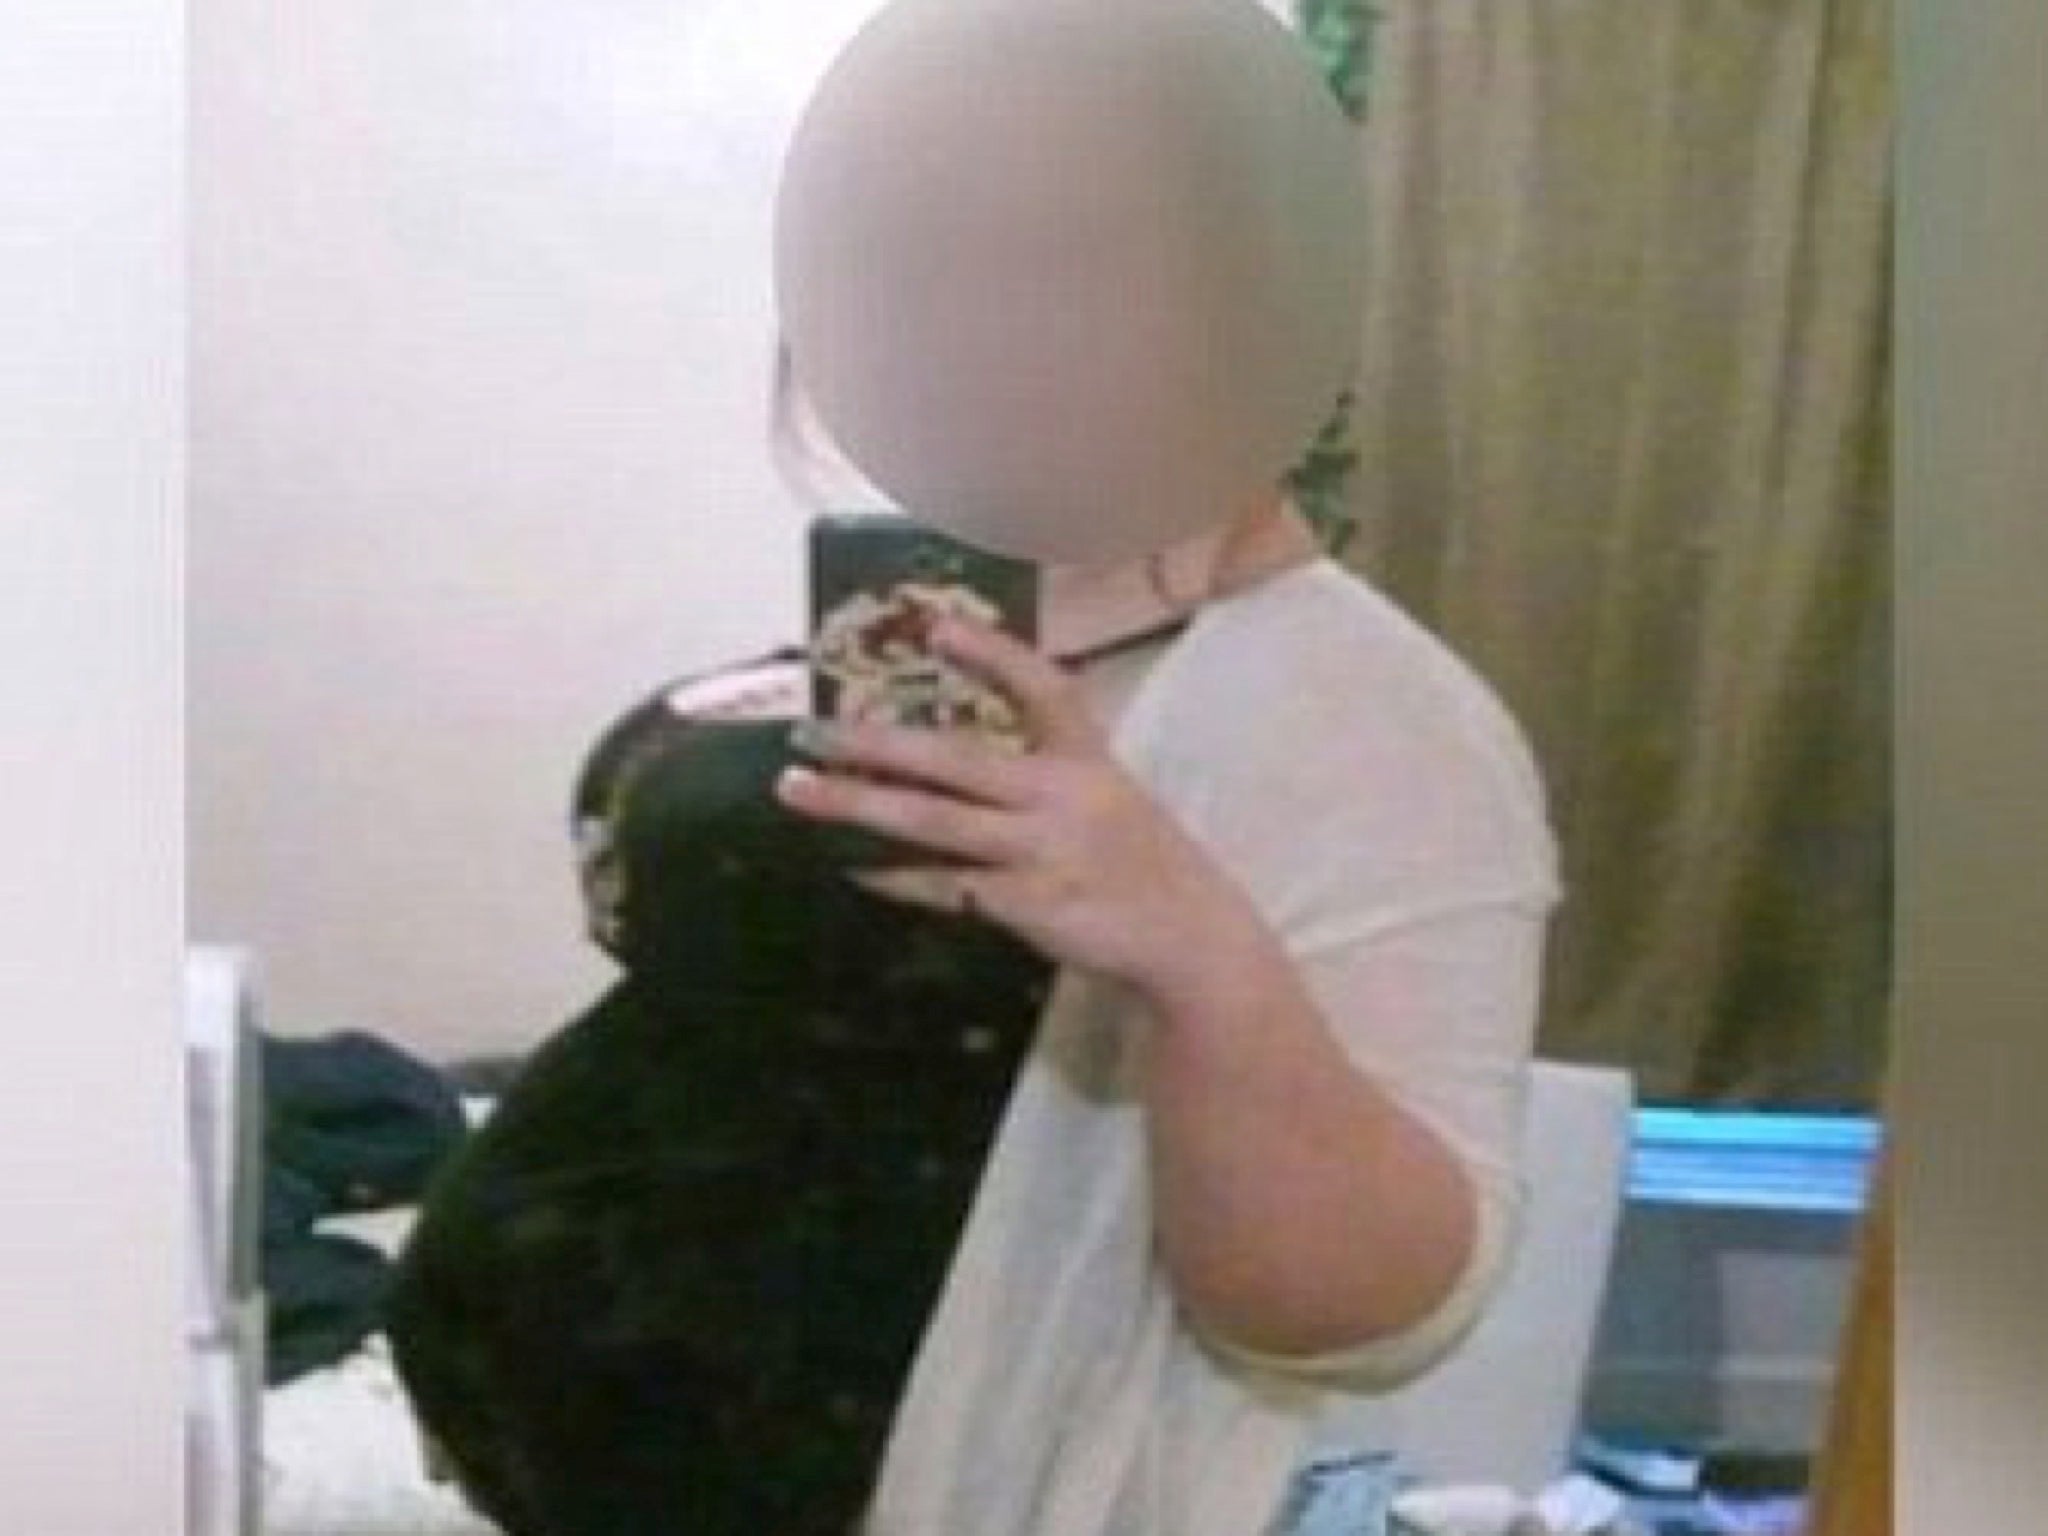 The teenager allegedly faked her pregnancy for 10 months